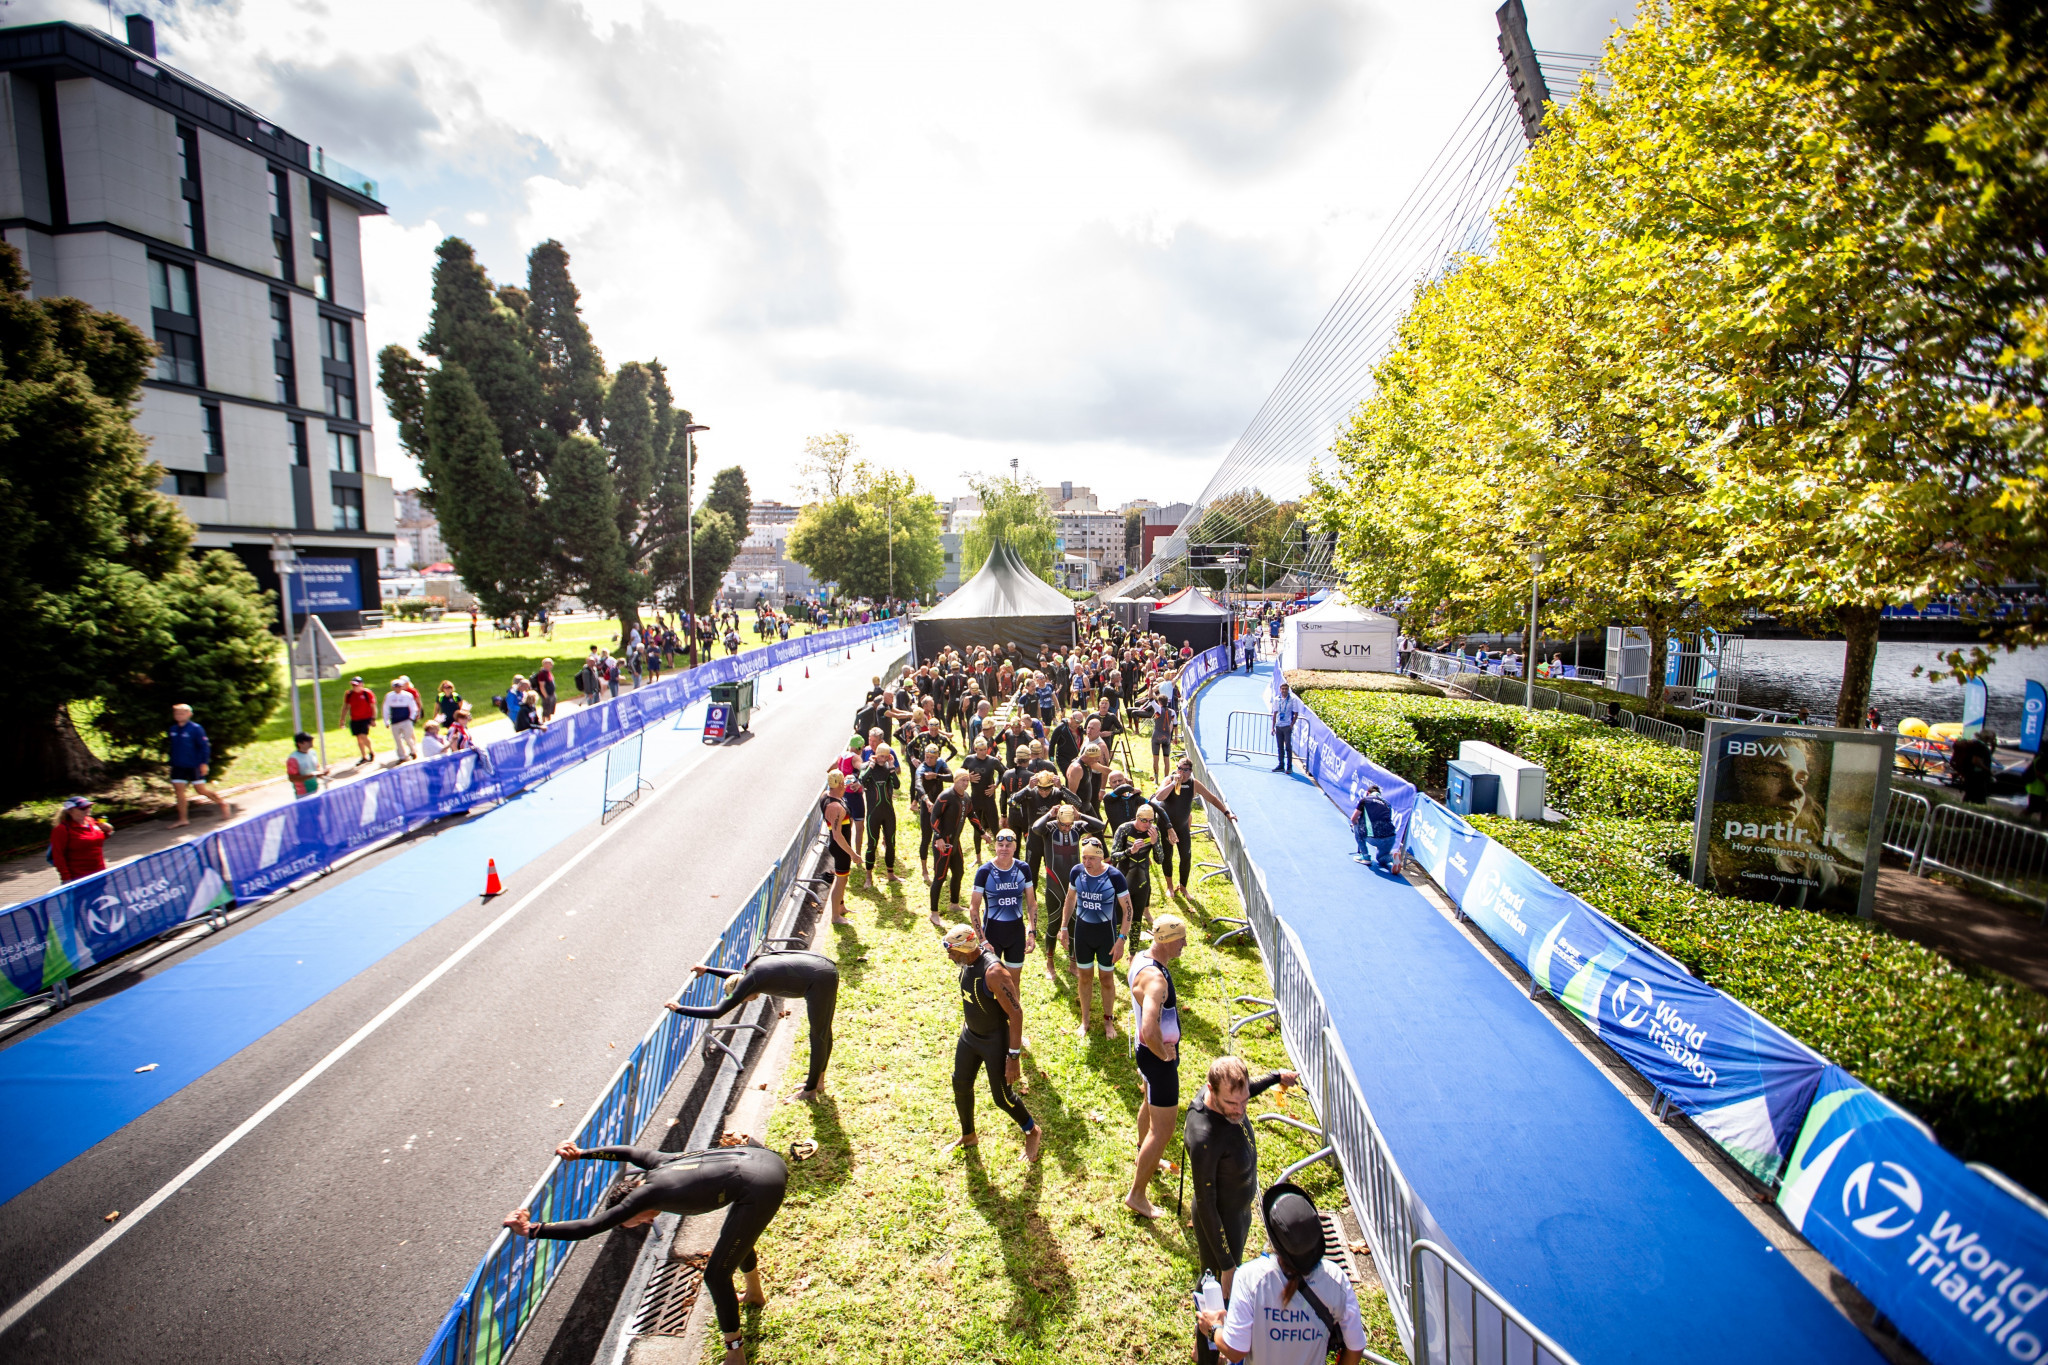 Hosts Spain win two age-group races on first day of World Triathlon Championship Finals